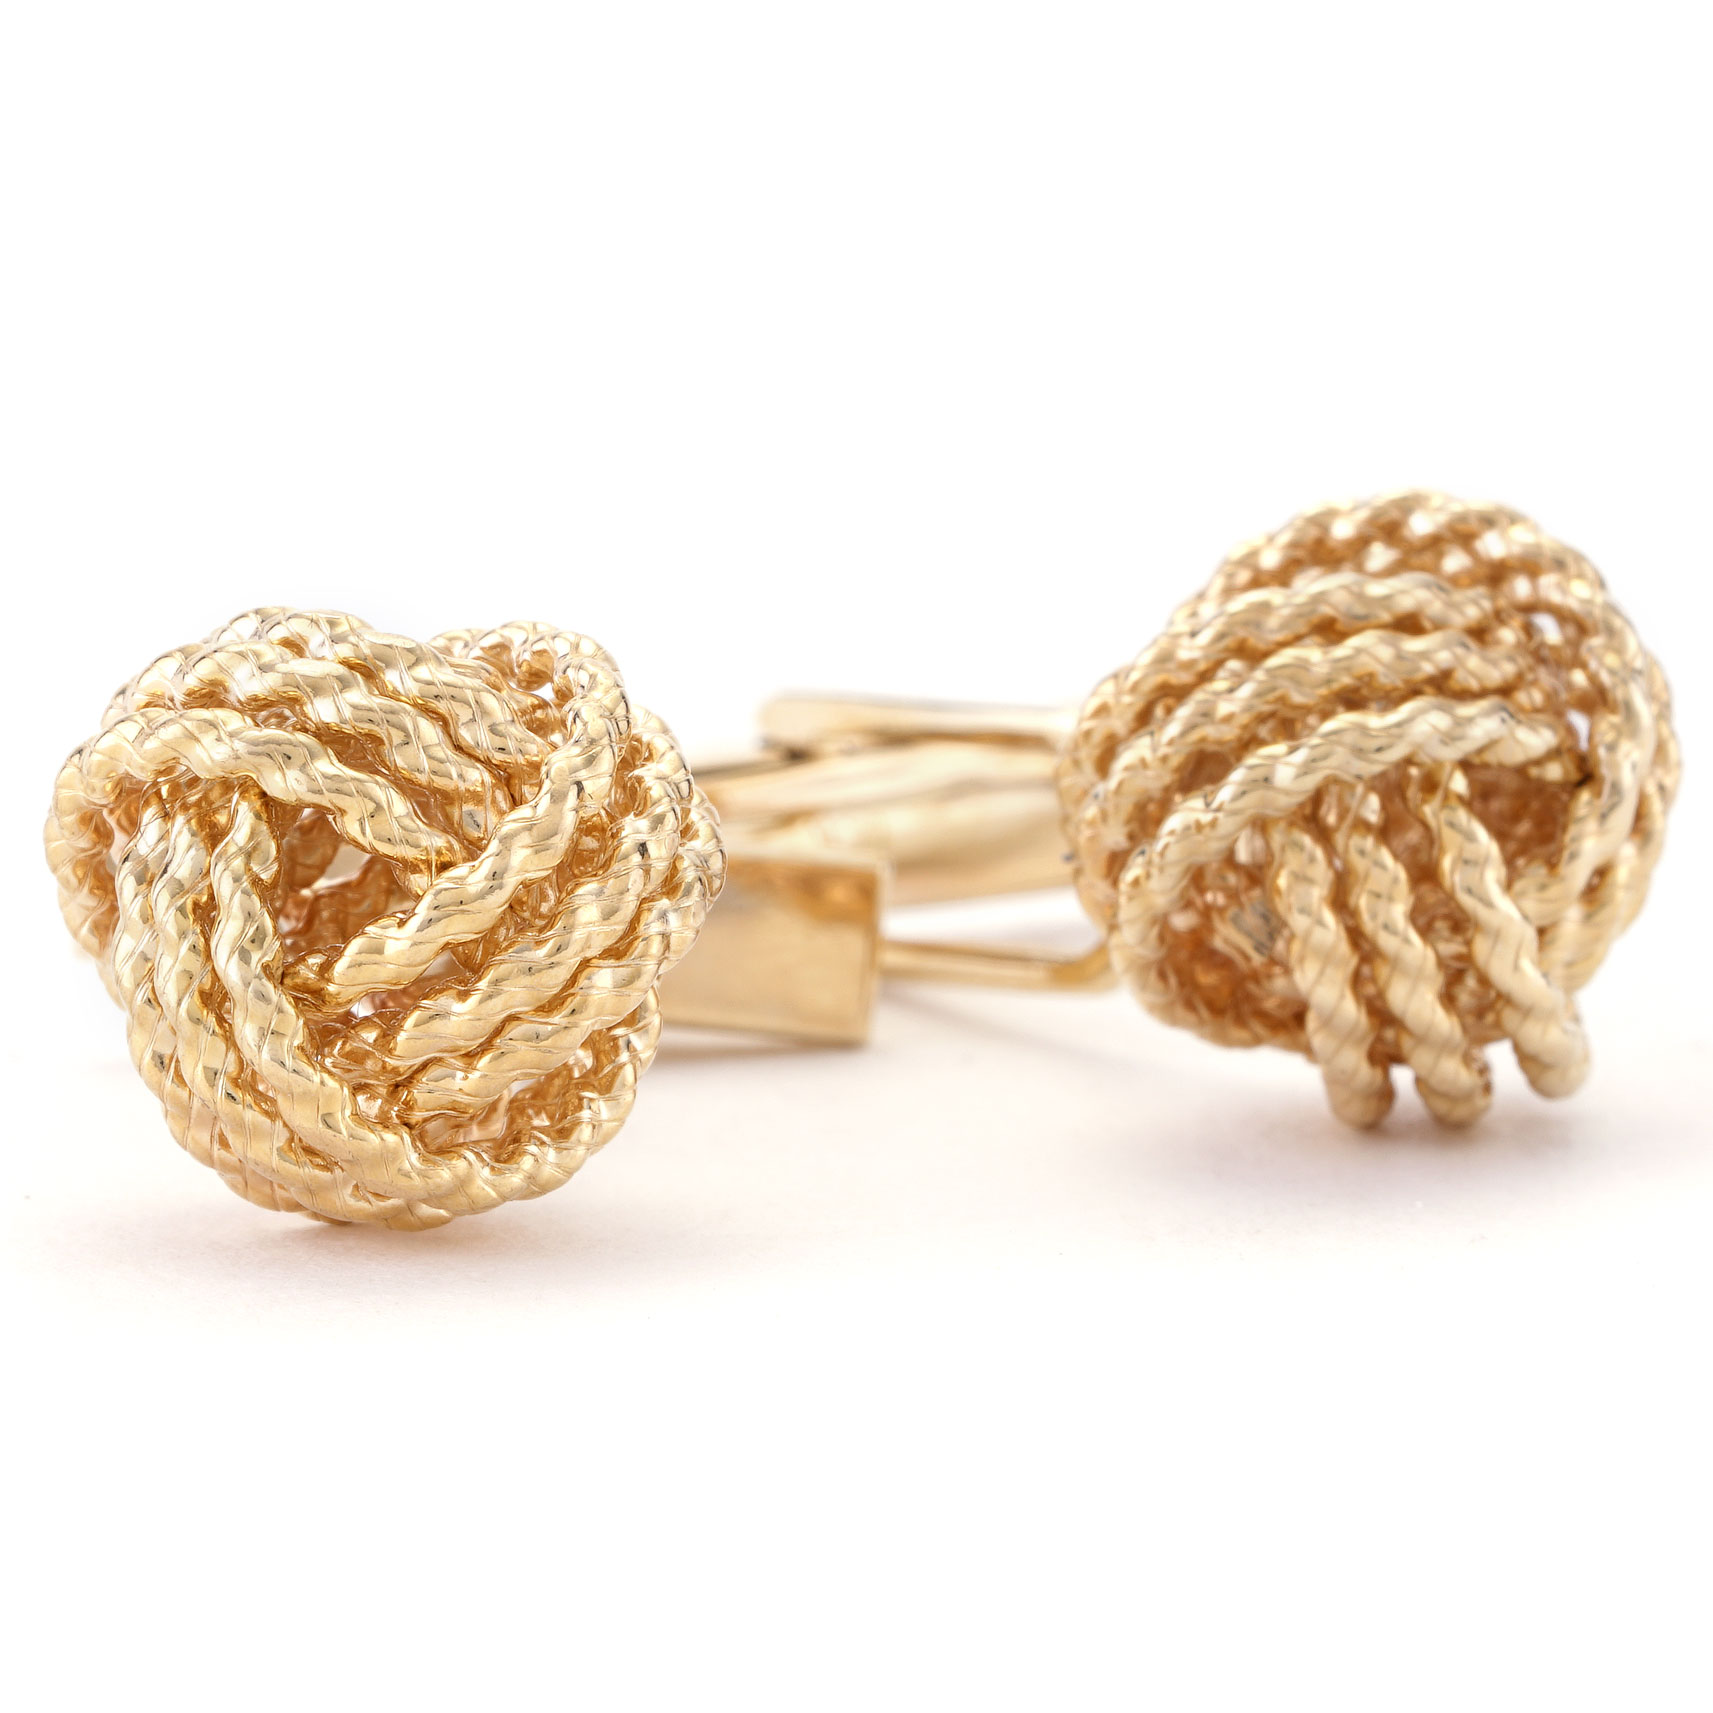 Twisted Love Knot Cufflinks in Yellow Gold